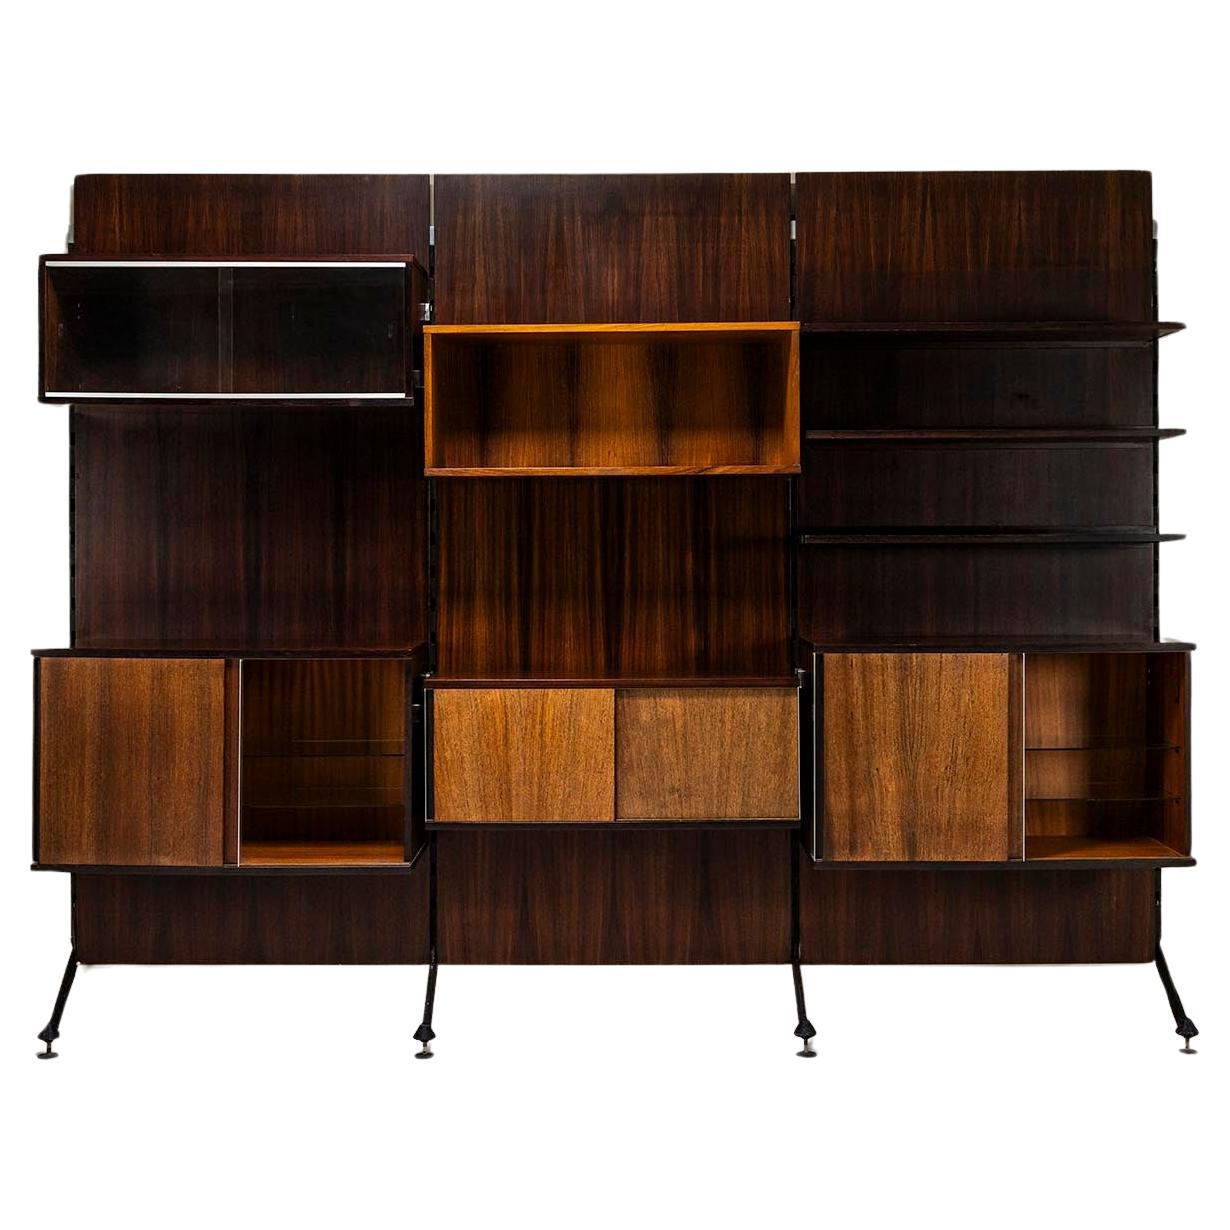 Urio Wall System in Rosewood by Ico and Luisa Parisi for MIM Roma, Italy 1957